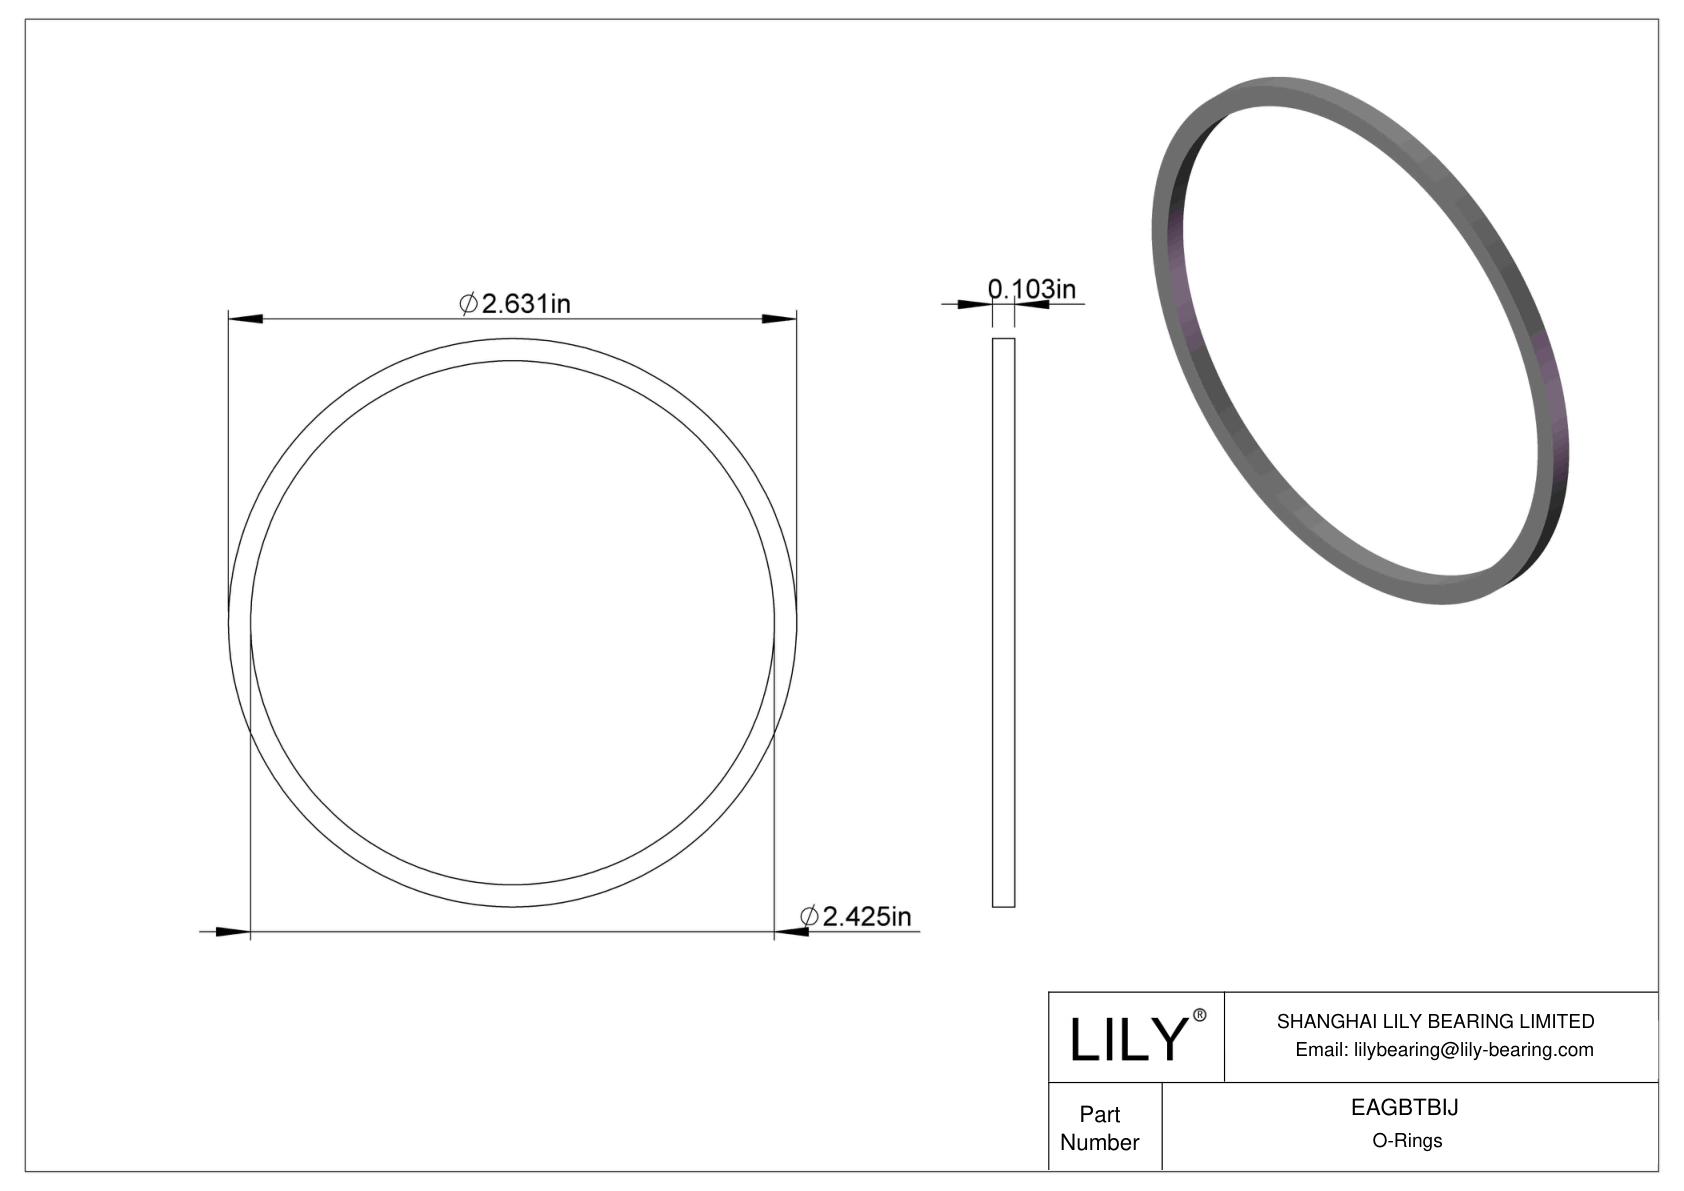 EAGBTBIJ Oil Resistant O-Rings Square cad drawing